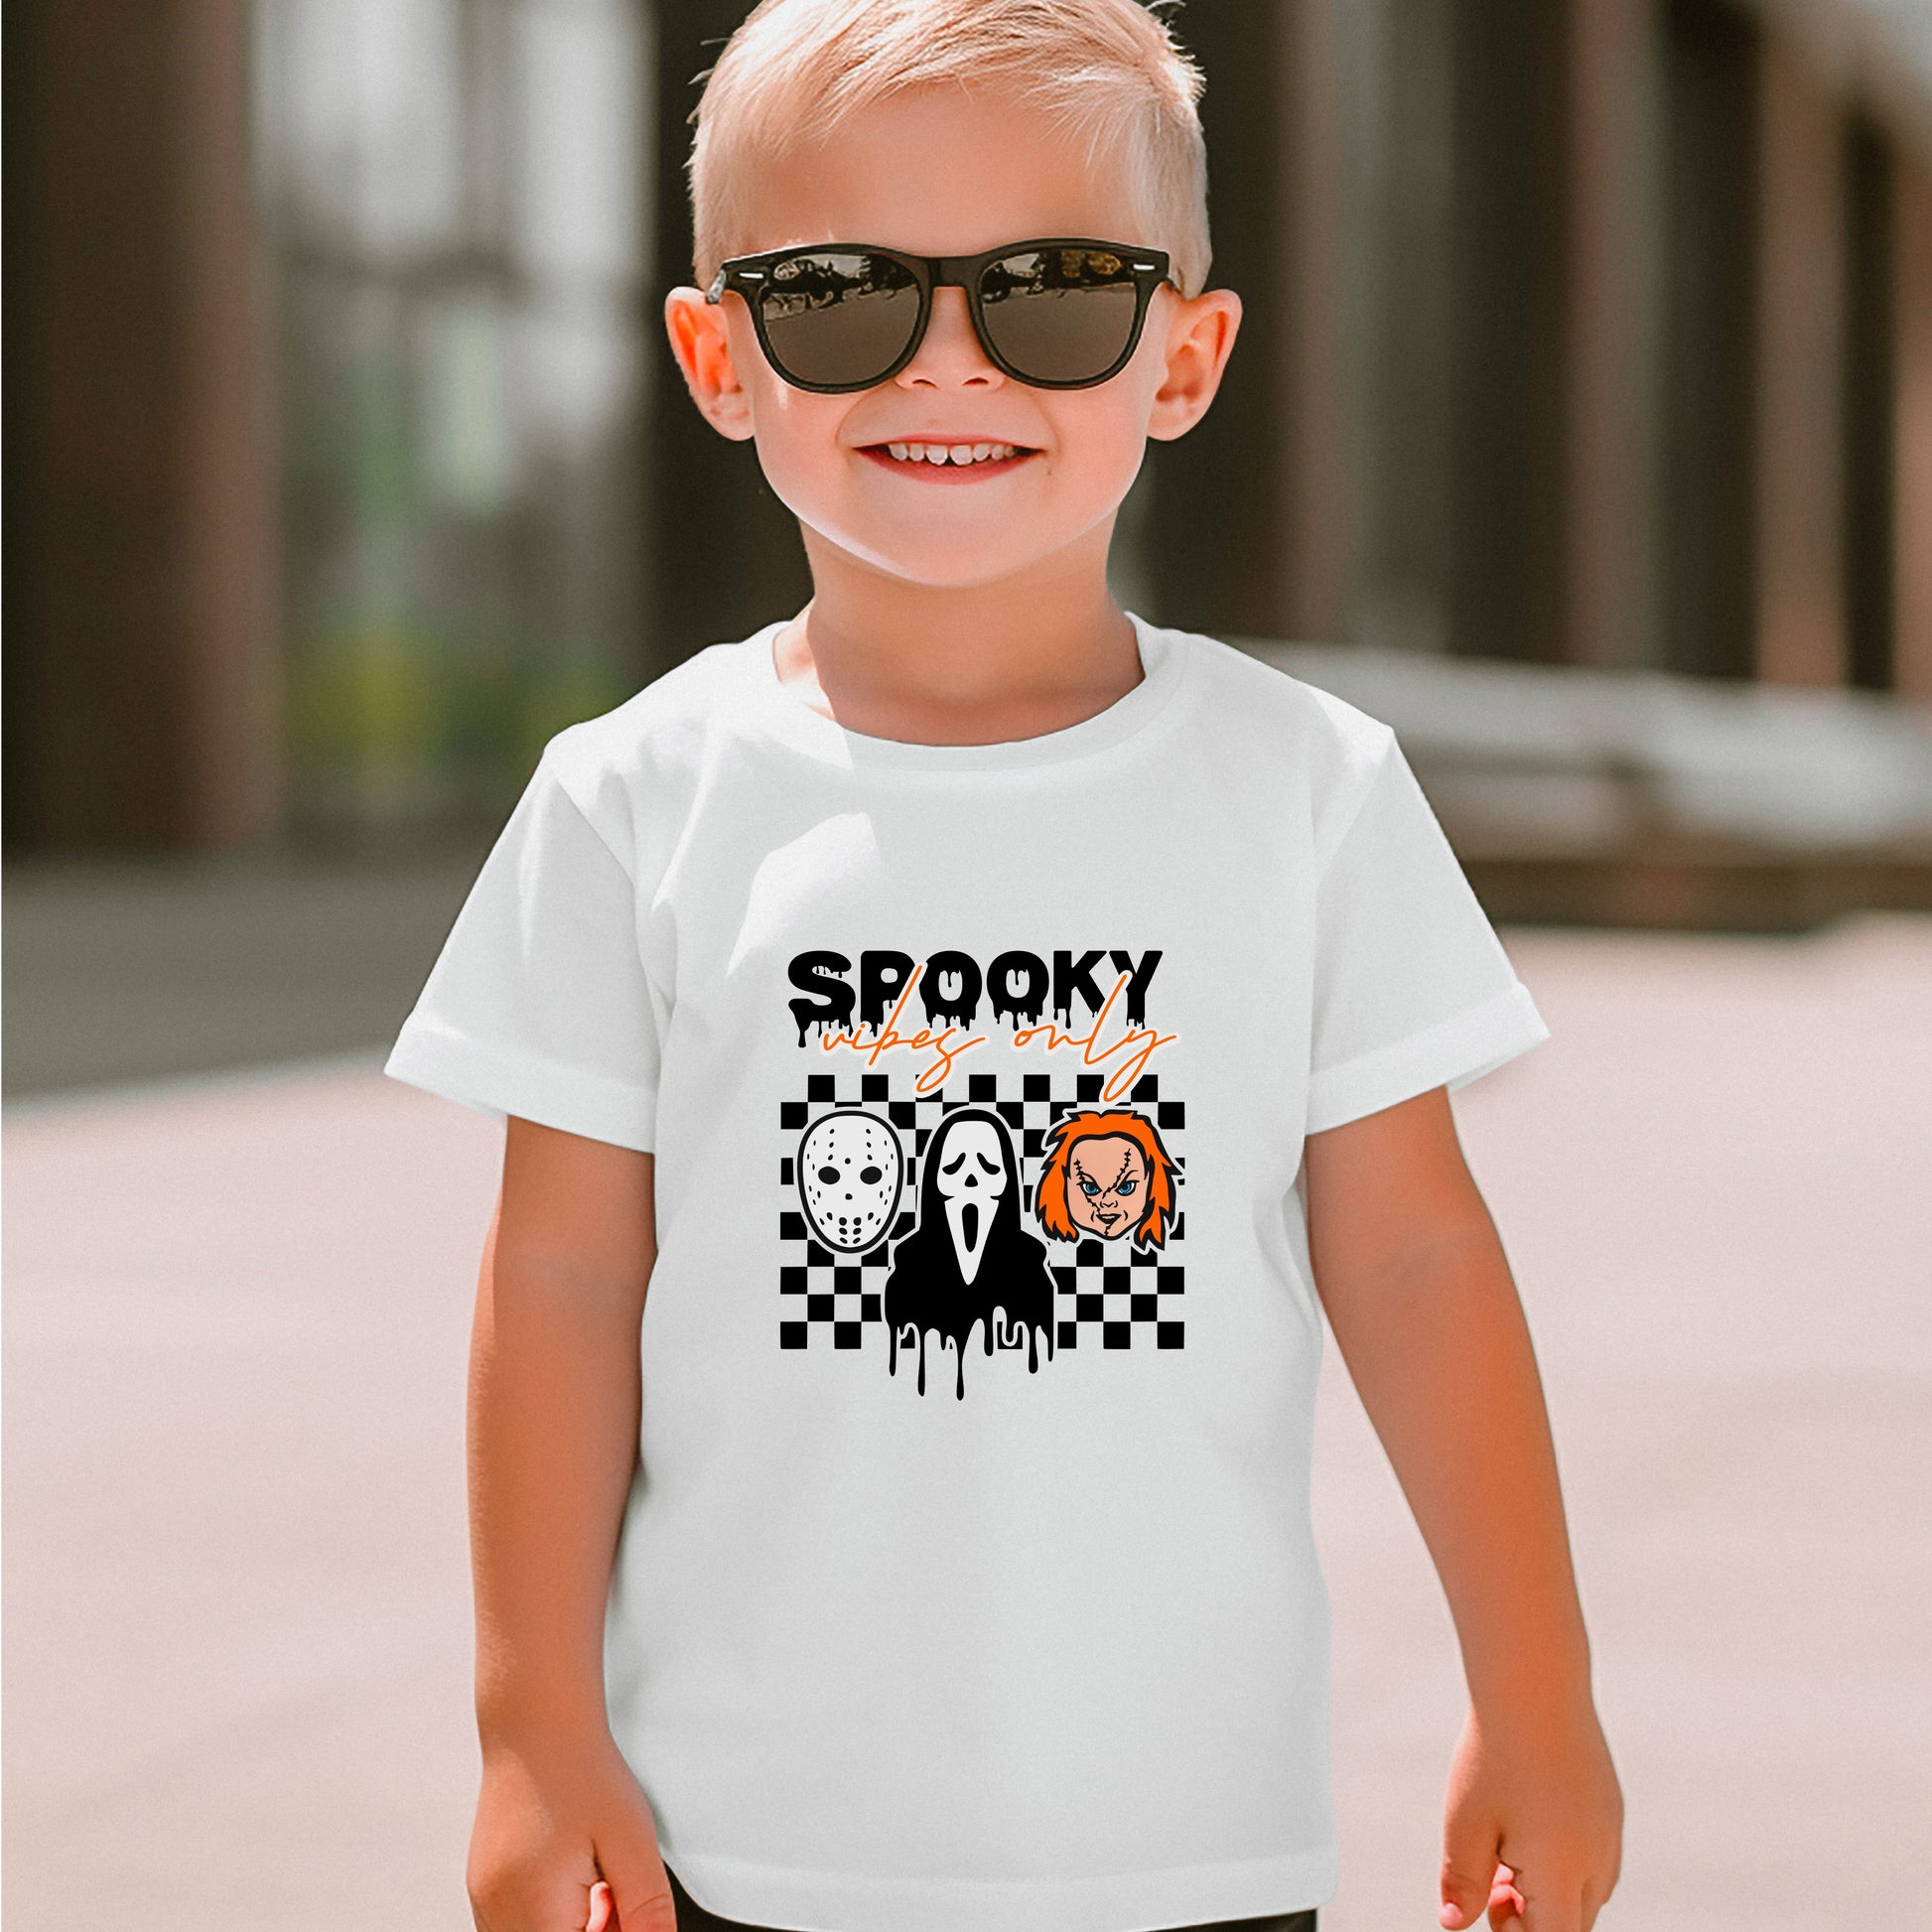 Spooky Vibes Only T-Shirt, Checkerboard Hallow – Bebe